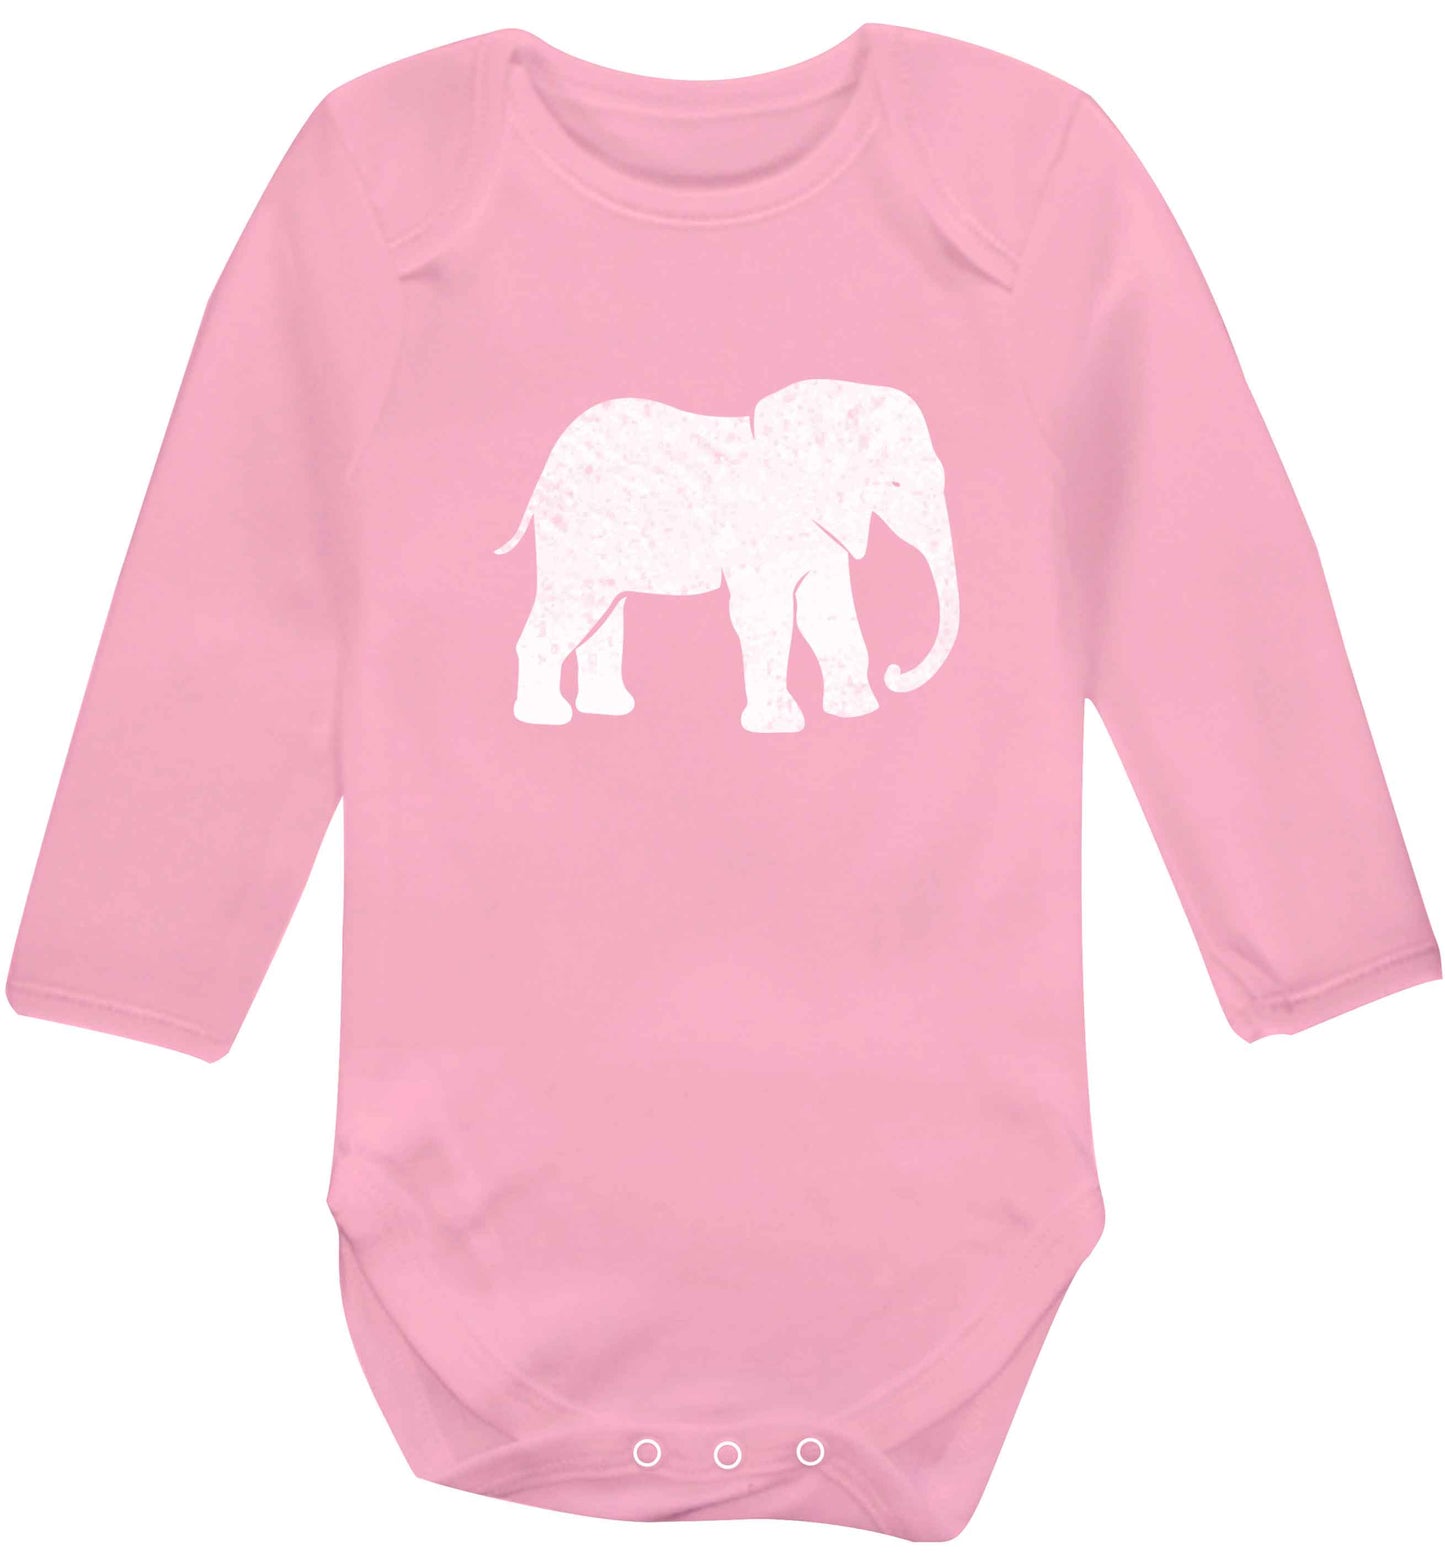 Pink elephant baby vest long sleeved pale pink 6-12 months